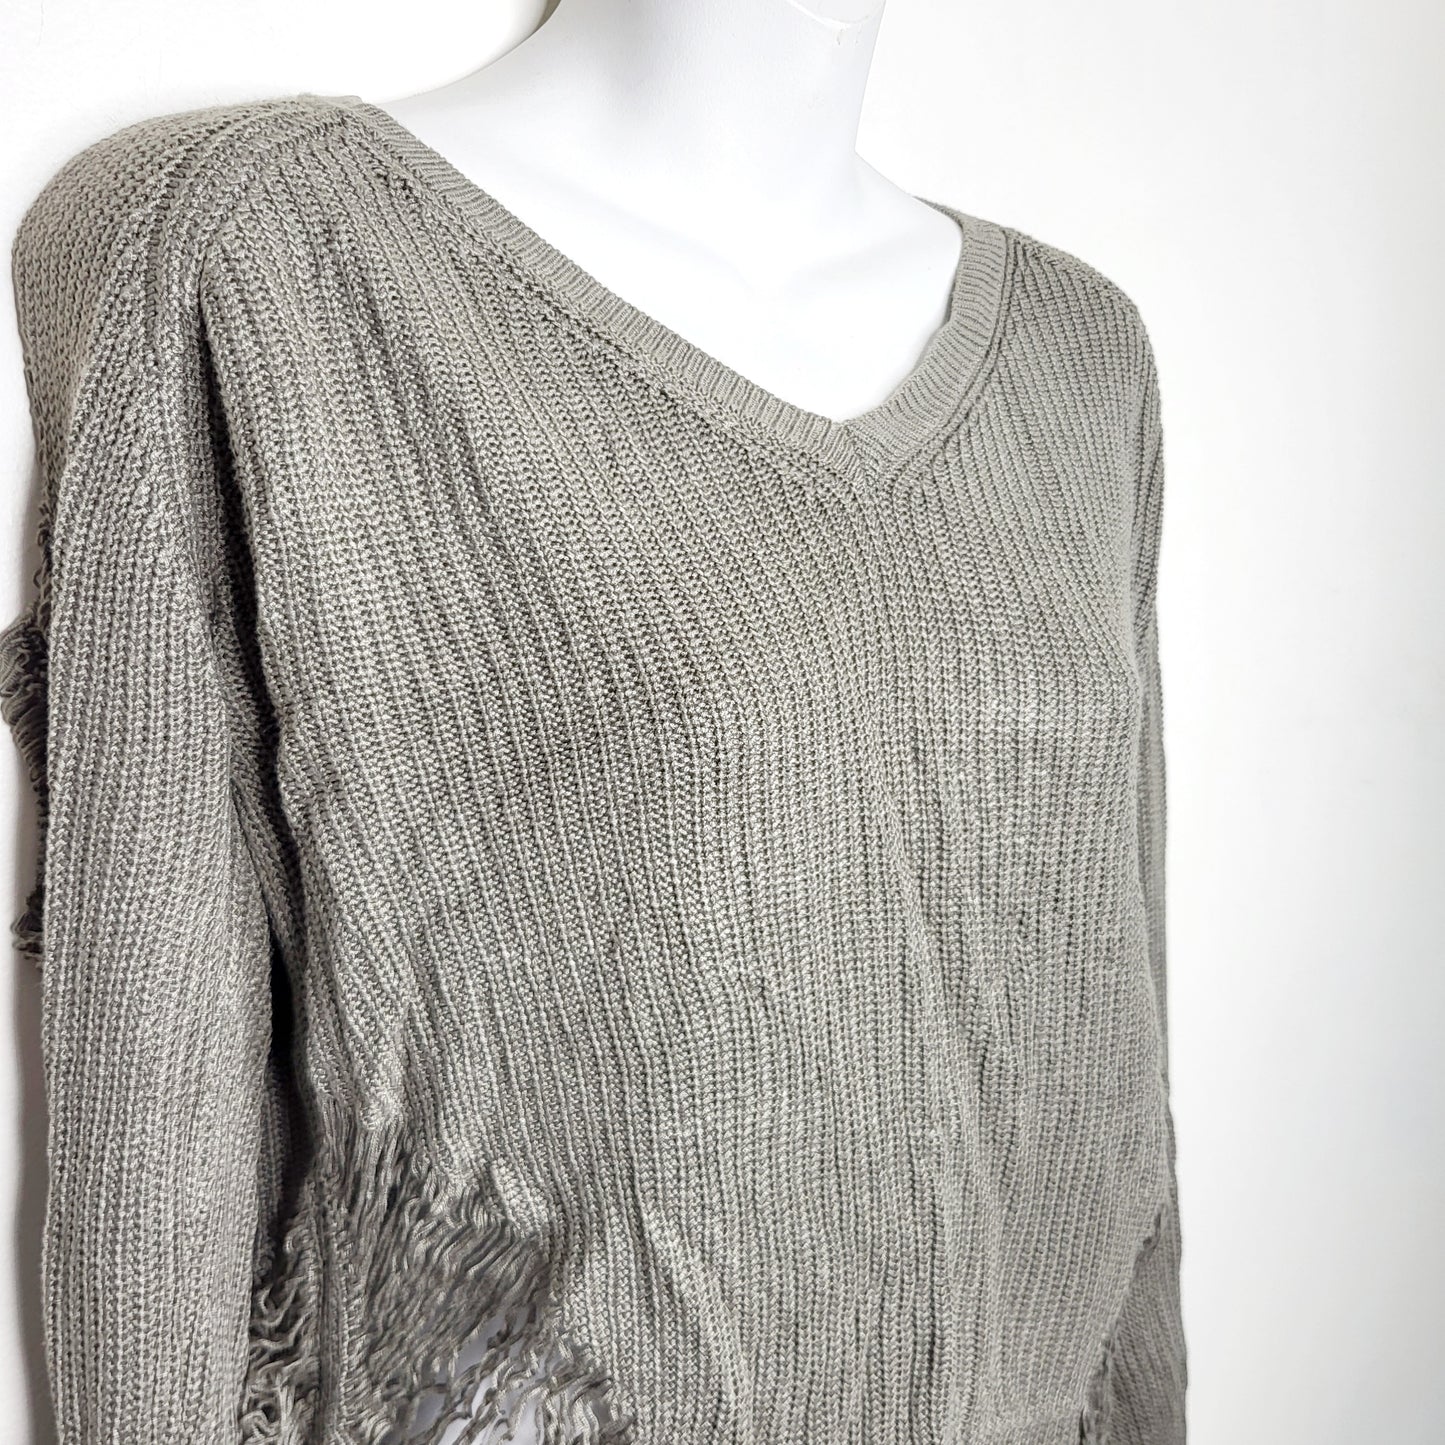 MMNG1 - Revamped olive green distresssed sweater, size large